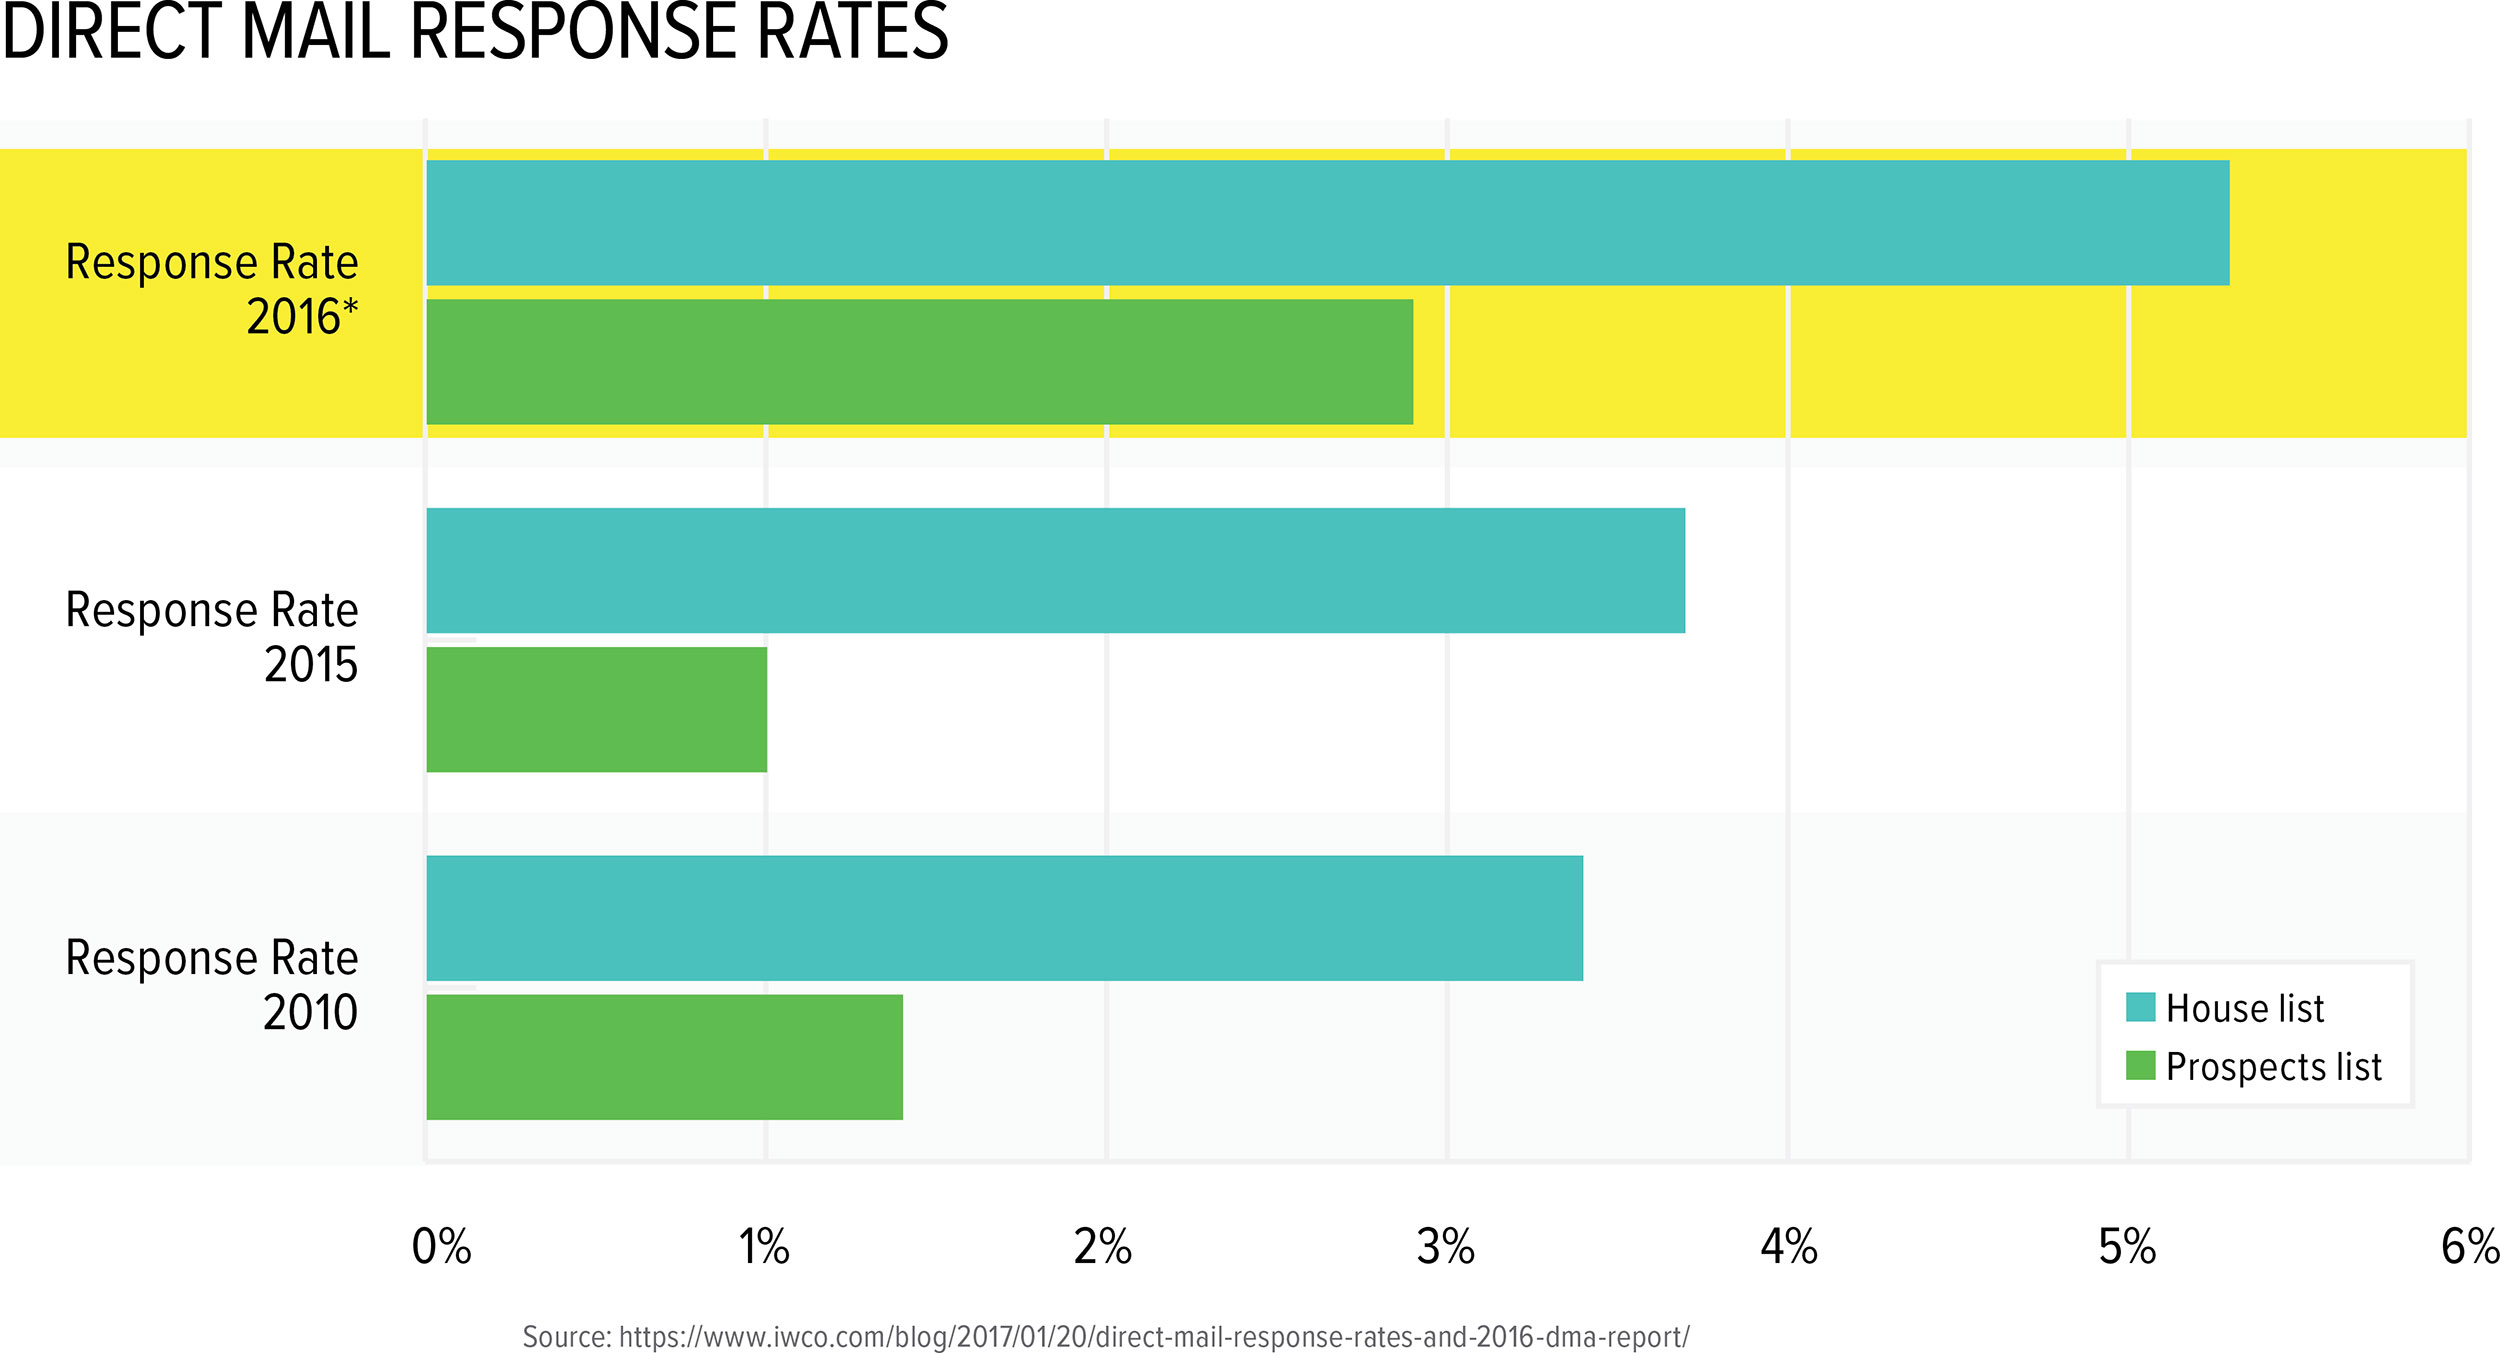 Response Rates for Direct Mail Continue to Rise According to DMA Report